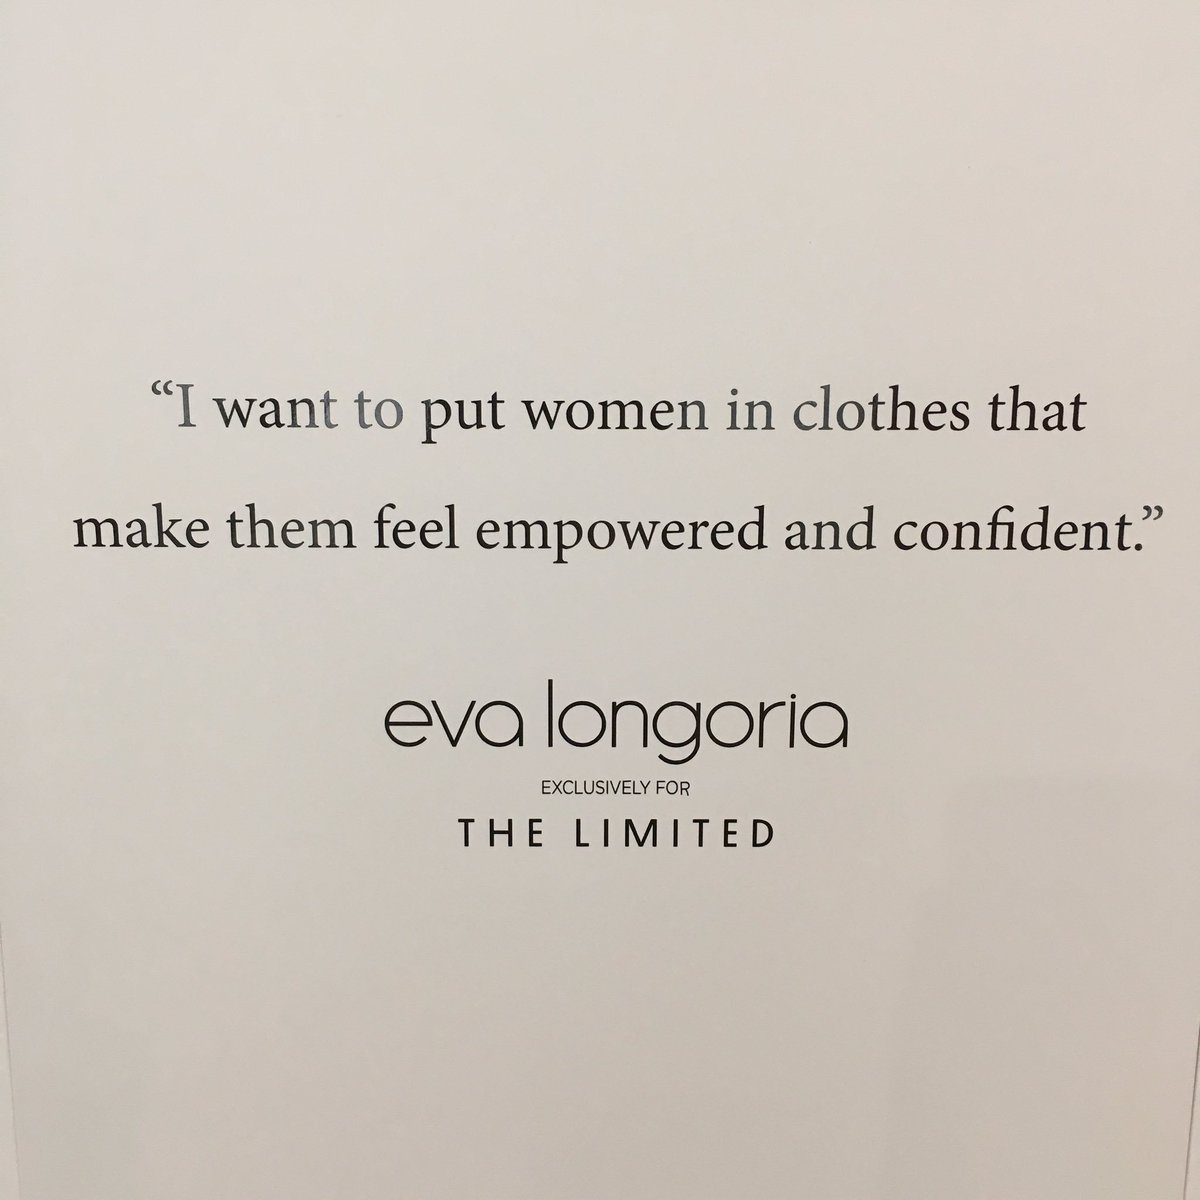 RT @Apsys_Group: The clothing line #EvaForTheLimited available at @posnania_ ! @EvaLongoria @TheLimited #Iconic https://t.co/j9PkfQQEn6